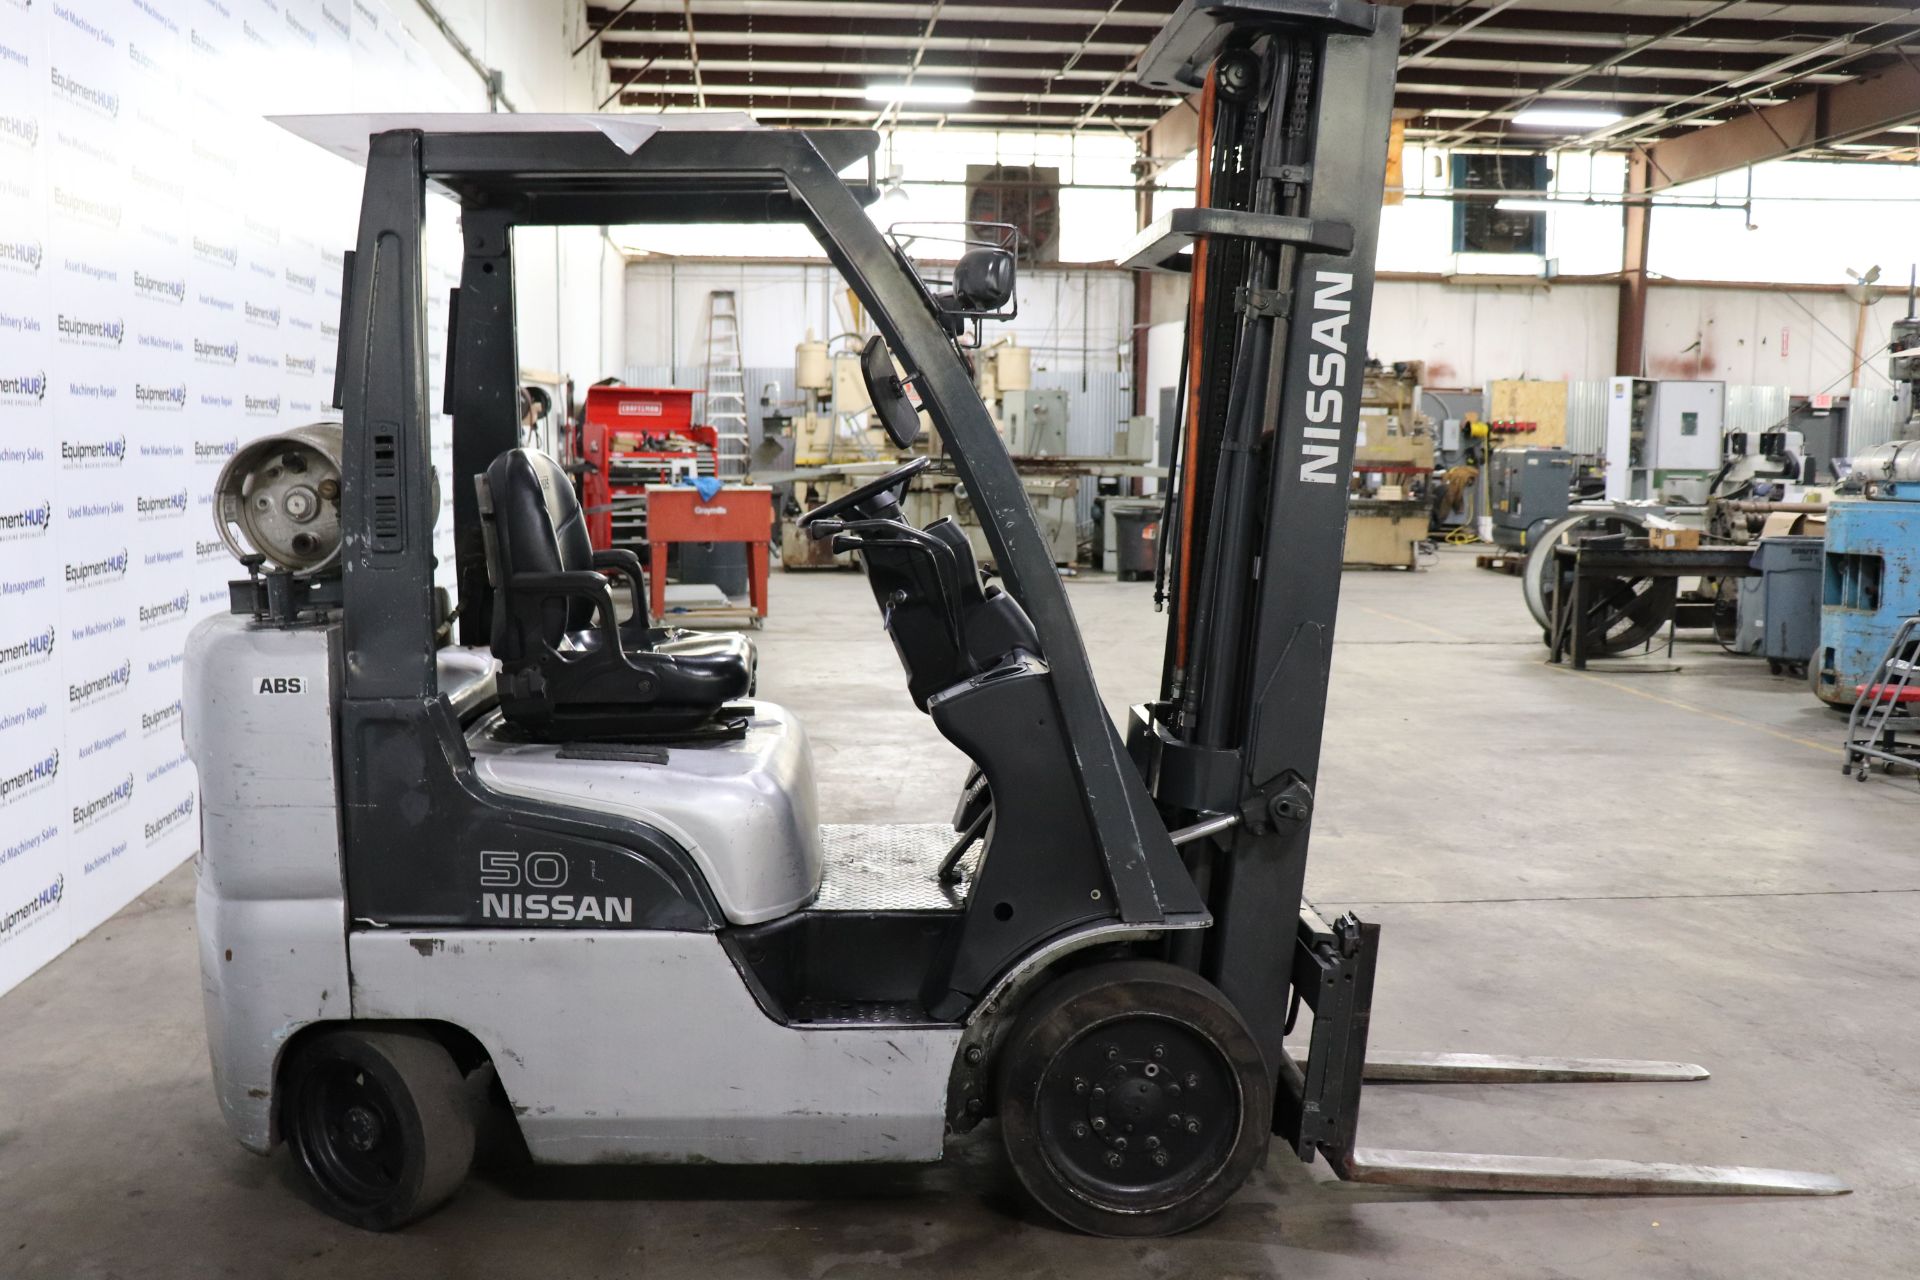 Nissan MCPL02A25LV 5000 Lb. Capacity 3 Stage Mast Cushion Propane Forklift - Image 7 of 13